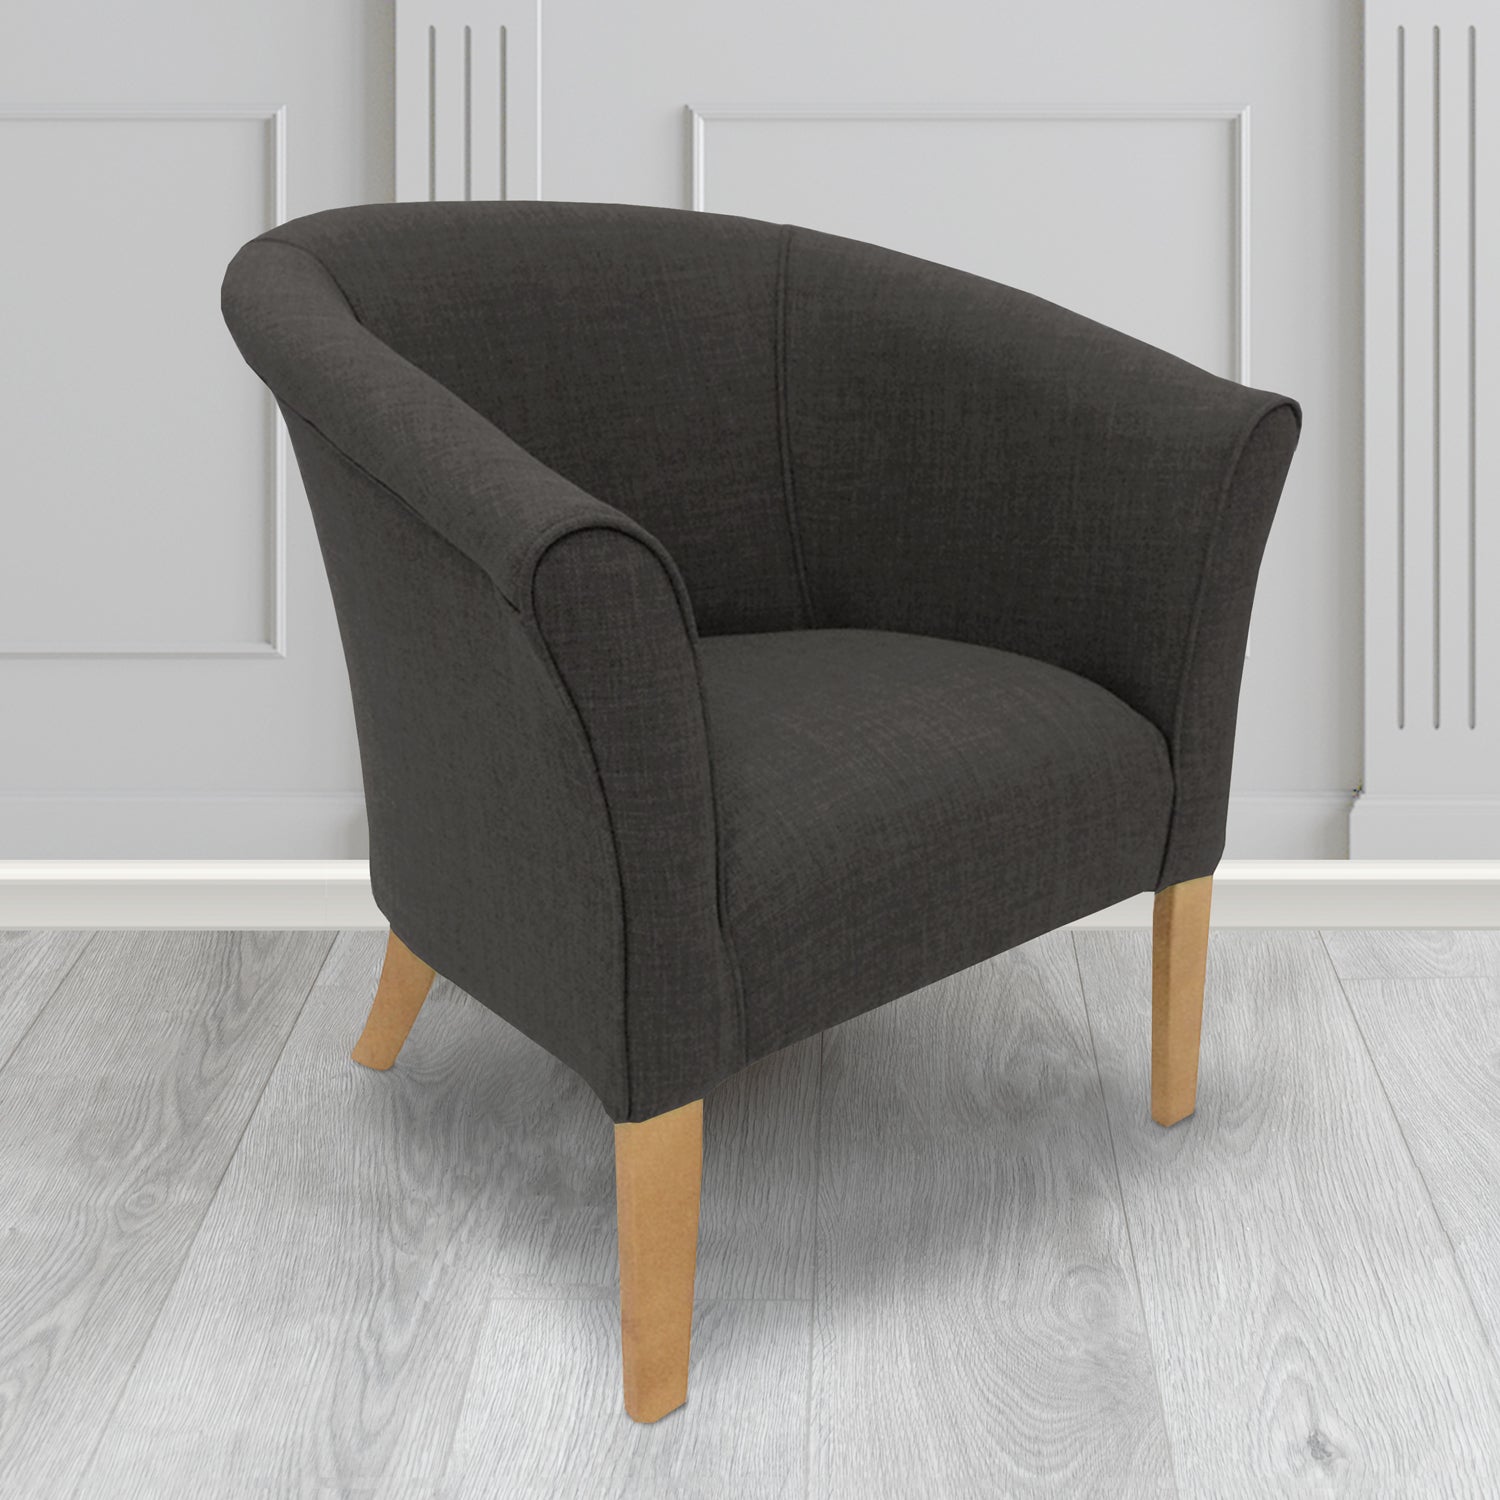 Quill Tub Chair in Linetta Charcoal Crib 5 Plain Fabric - Antimicrobial, Stain Resistant & Waterproof - The Tub Chair Shop